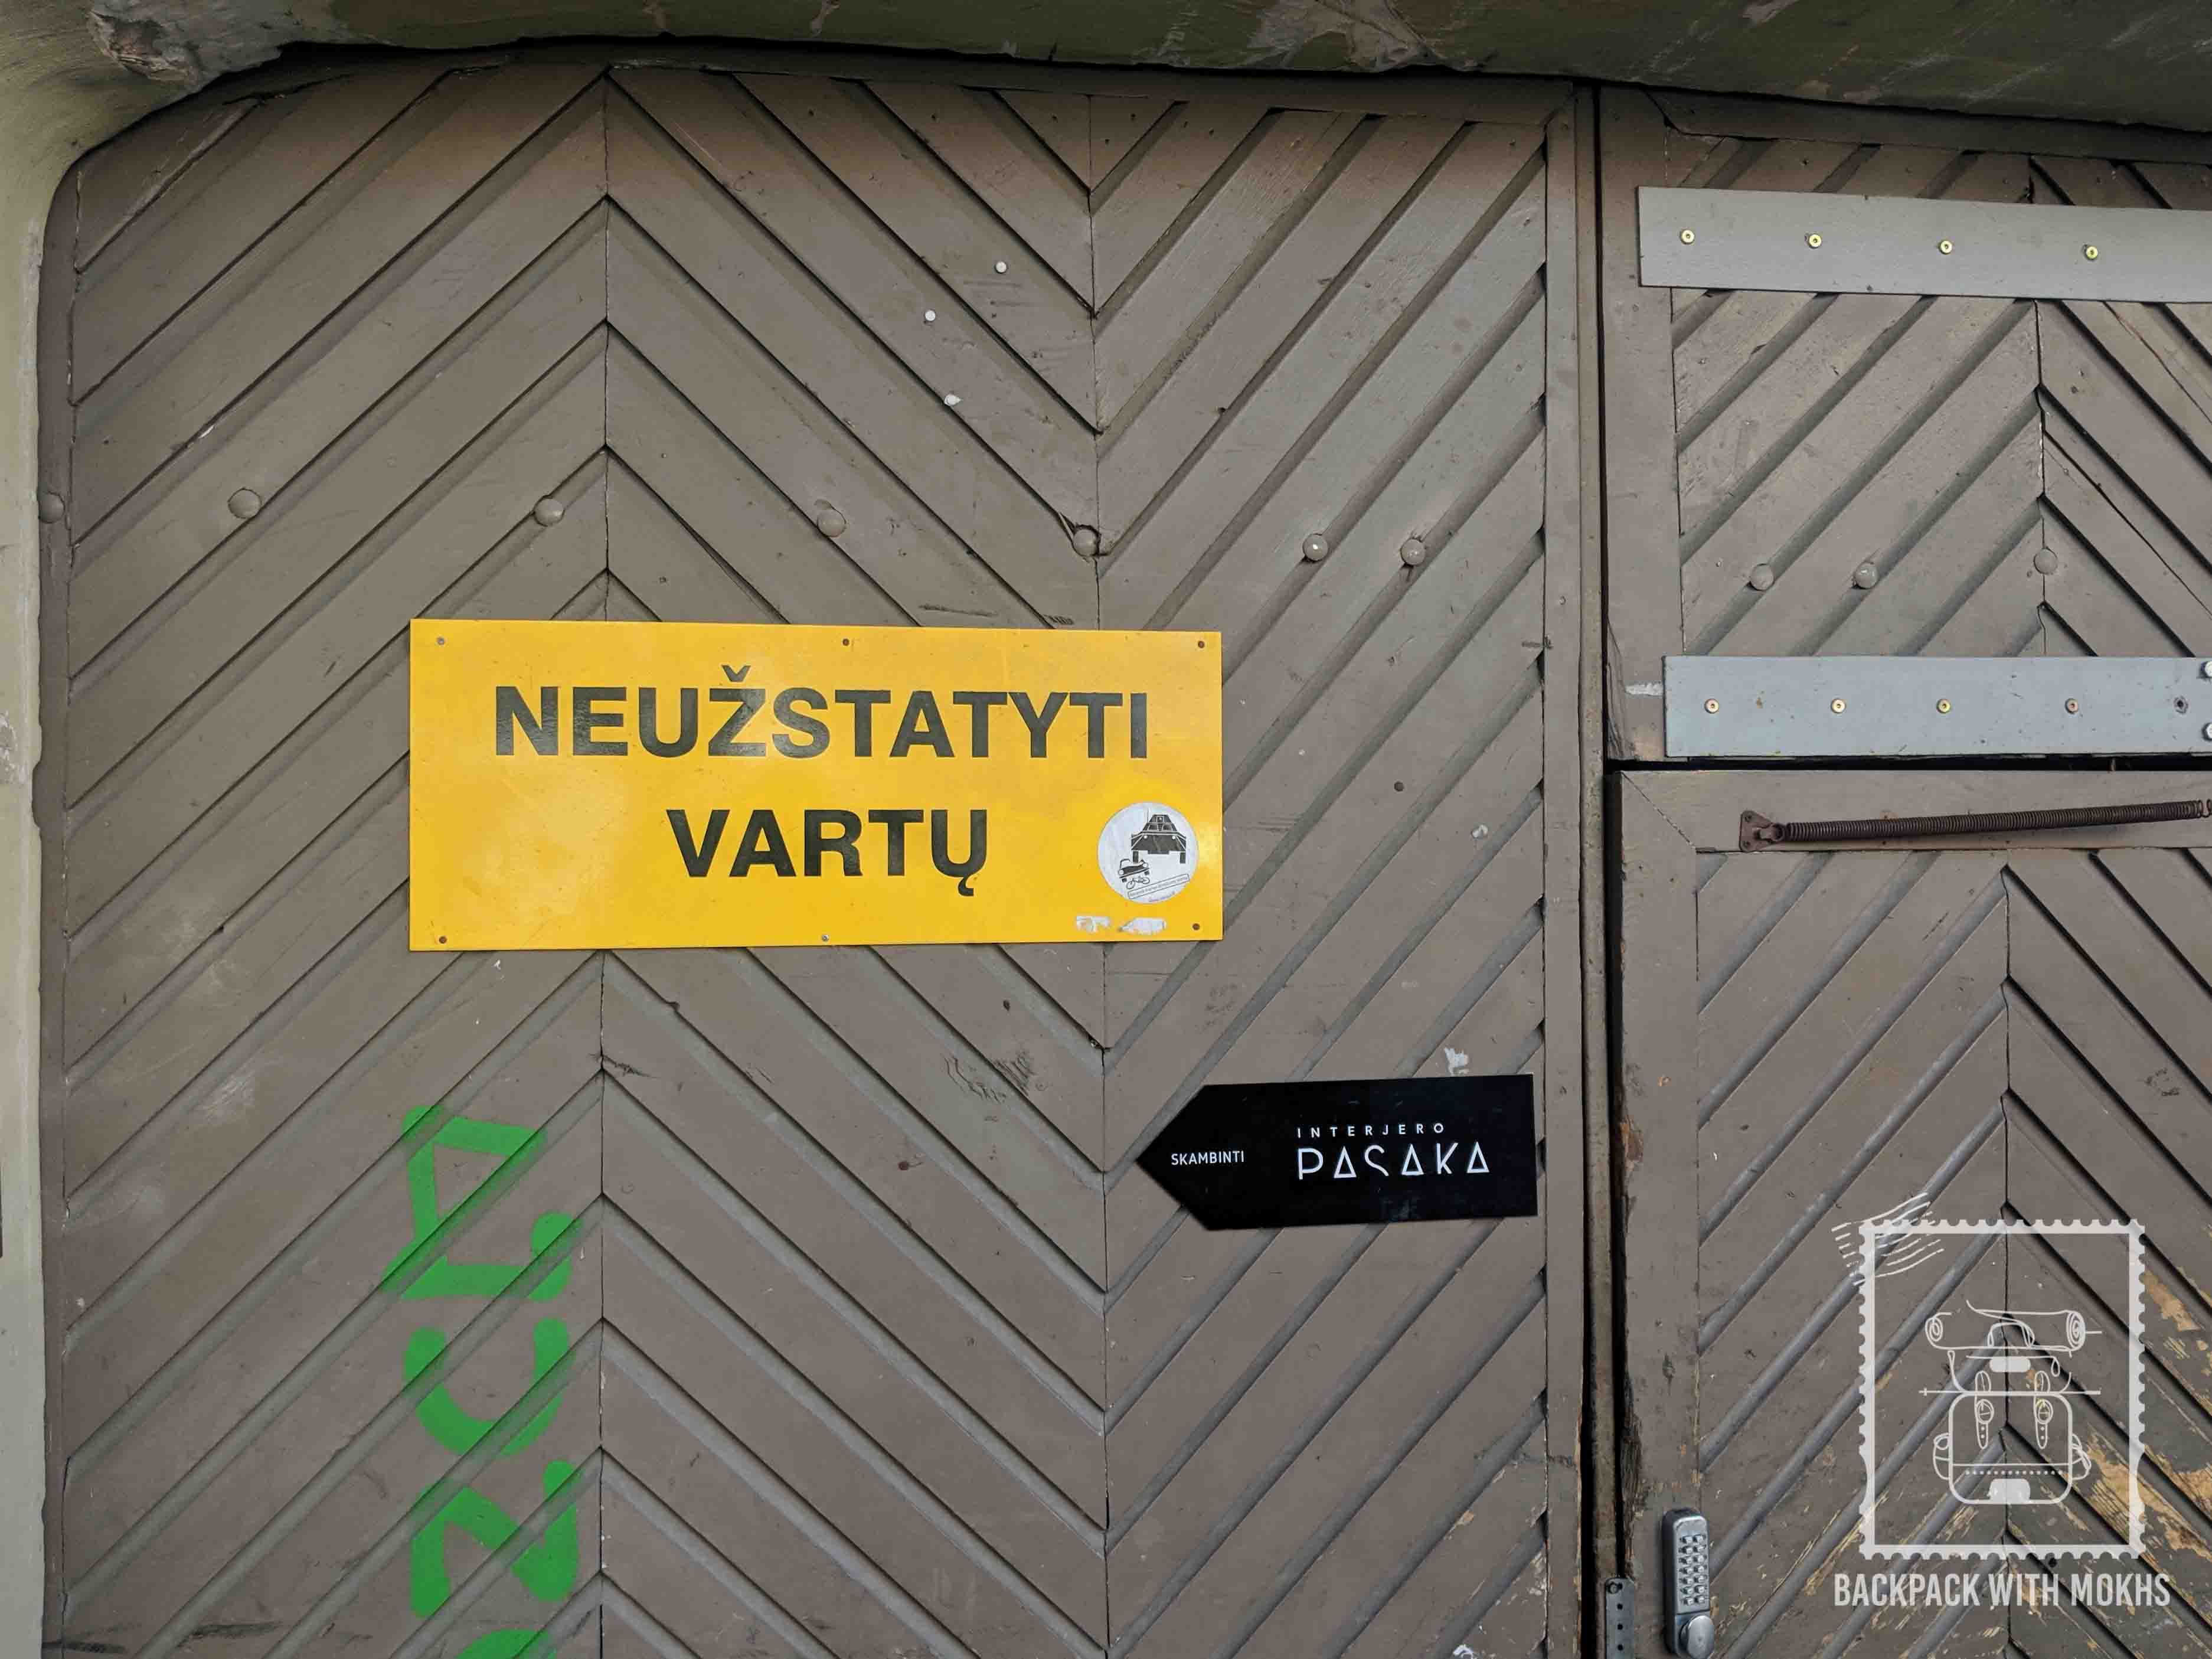 Warning signs in Lithuania